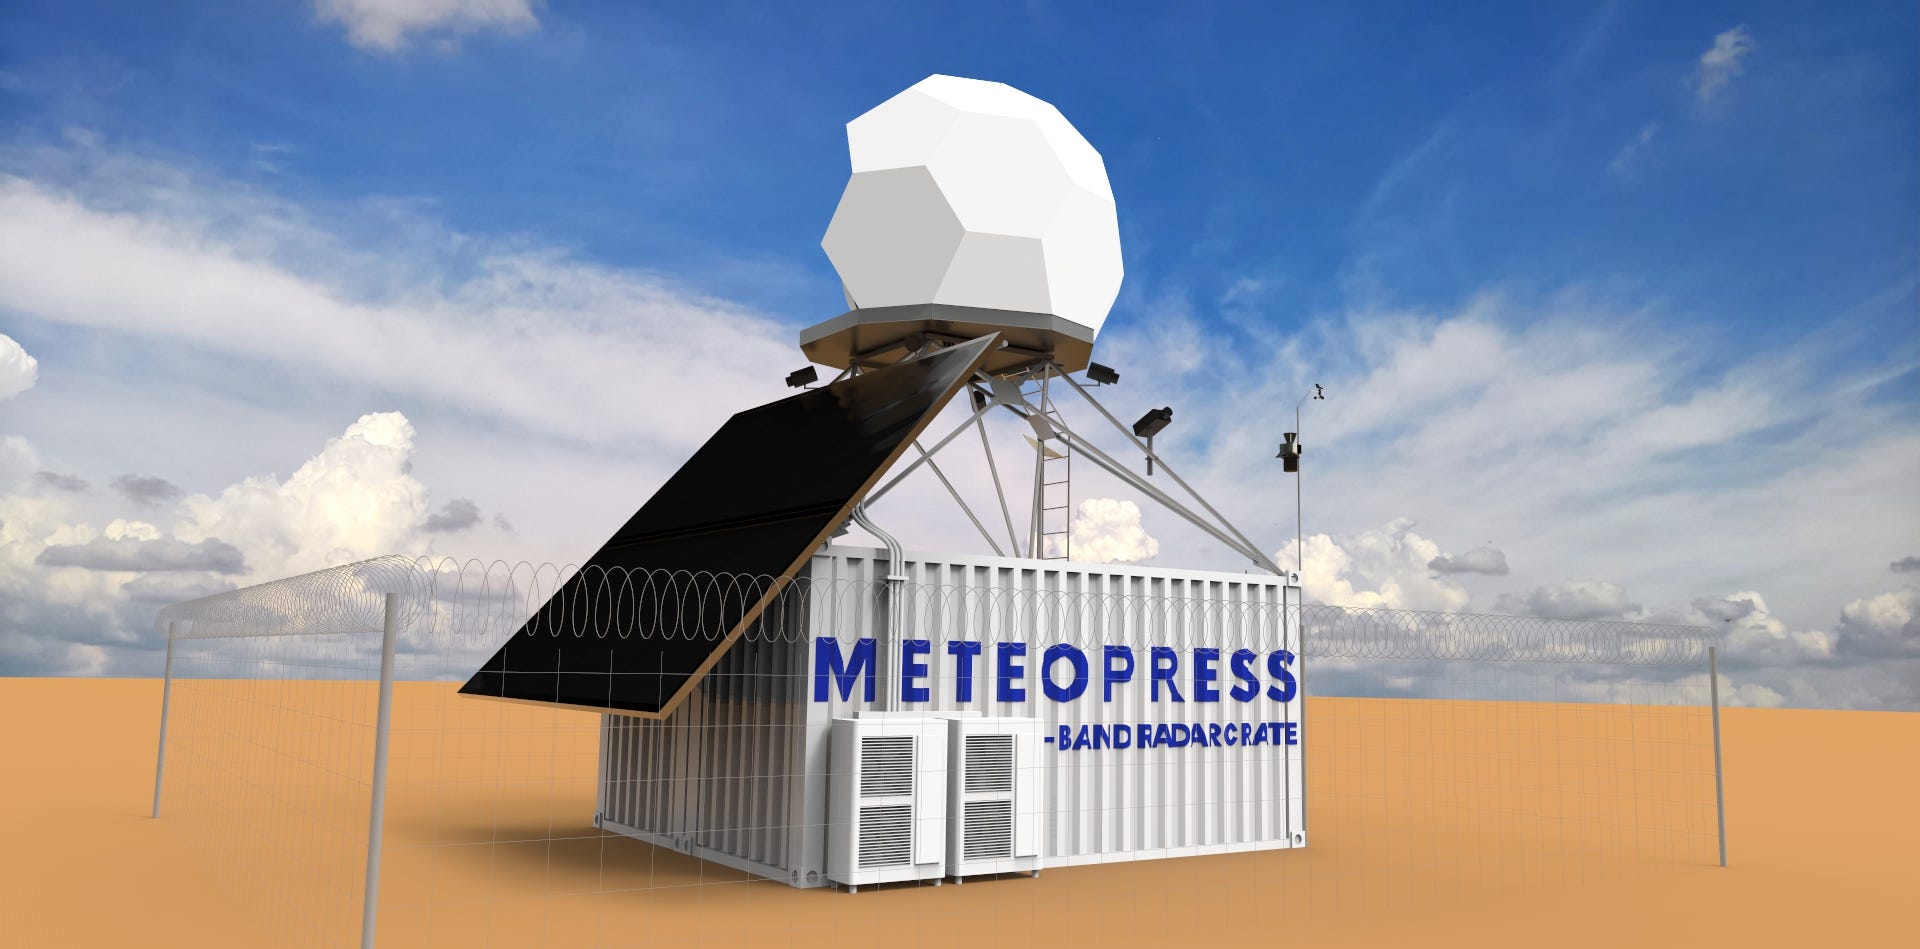 2021 in Meteopress - Covid brought the C-band radar!